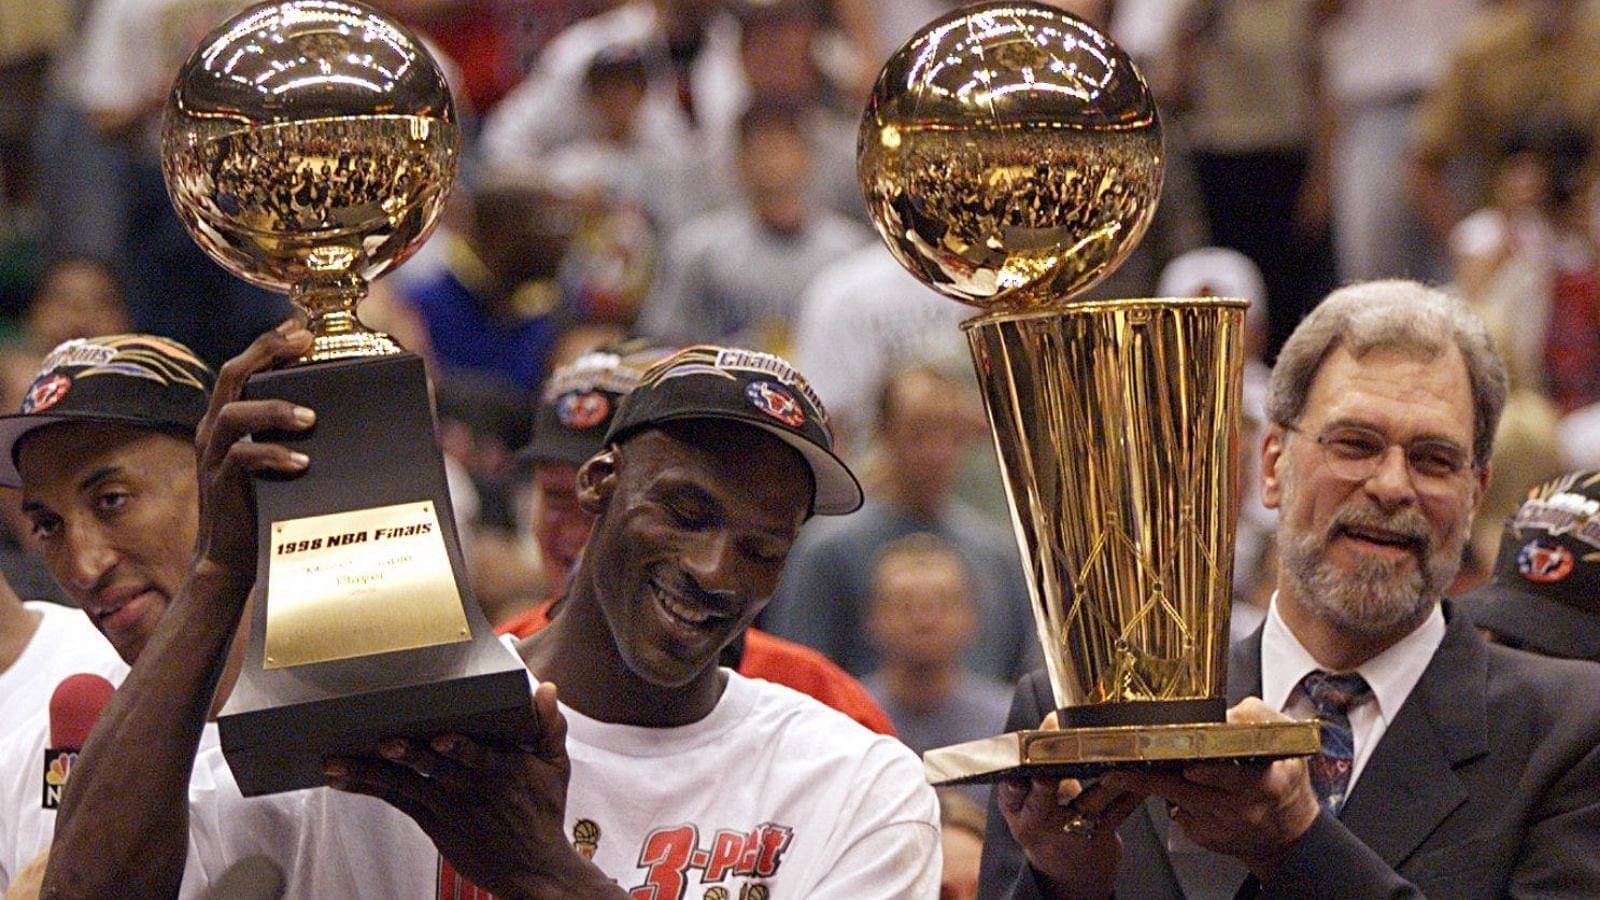 "If 70 wins get us a ring, I'll be happier": Michael Jordan confessed to not feeling the same as a championship or gold medal on having a historic 70 wins season